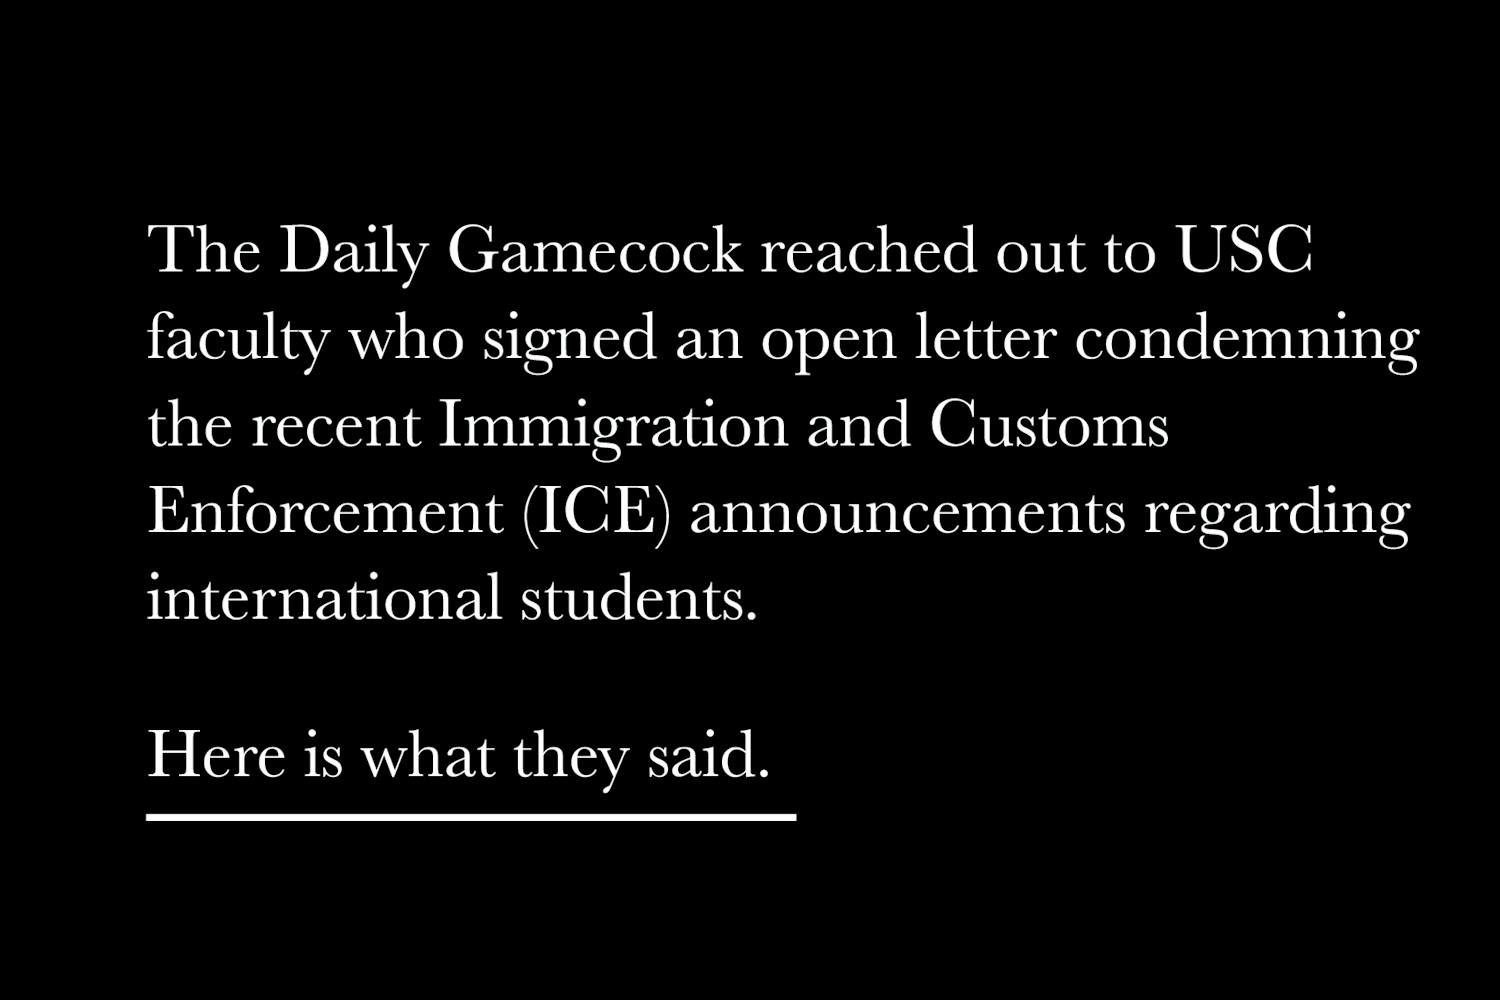 An open letter condemning ICE's latest guidelines regarding international students has amassed over 33,000 faculty signatures, including approximately 175 from 鶹С򽴫ý. Here is what they had to say.